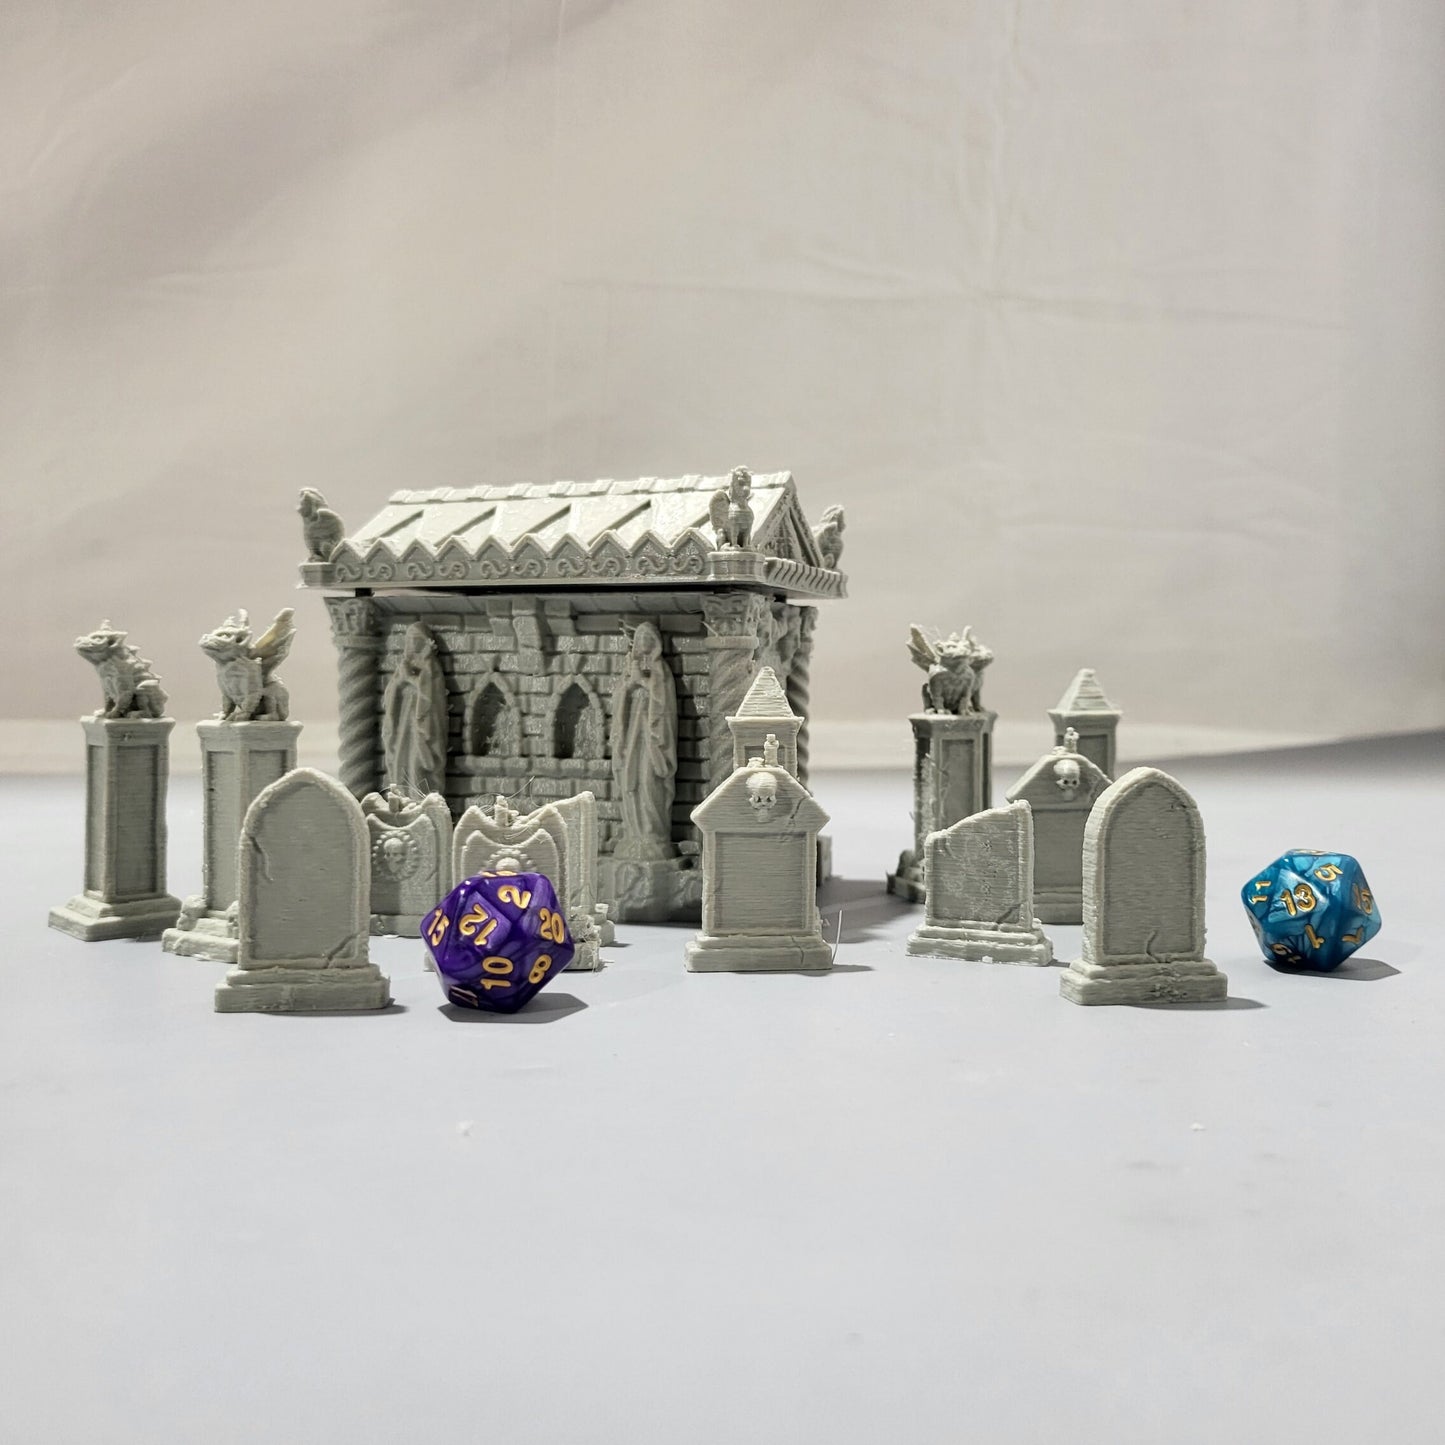 stocking stuffer, christmas gift, Tombstones, gaming, tabletop, tabletop games, Stocking, gift, christmas, perfect gift, terrain, graveyard, cemetery, dnd terrain, dungeons and dragons, buy now, sale, black friday, holidays